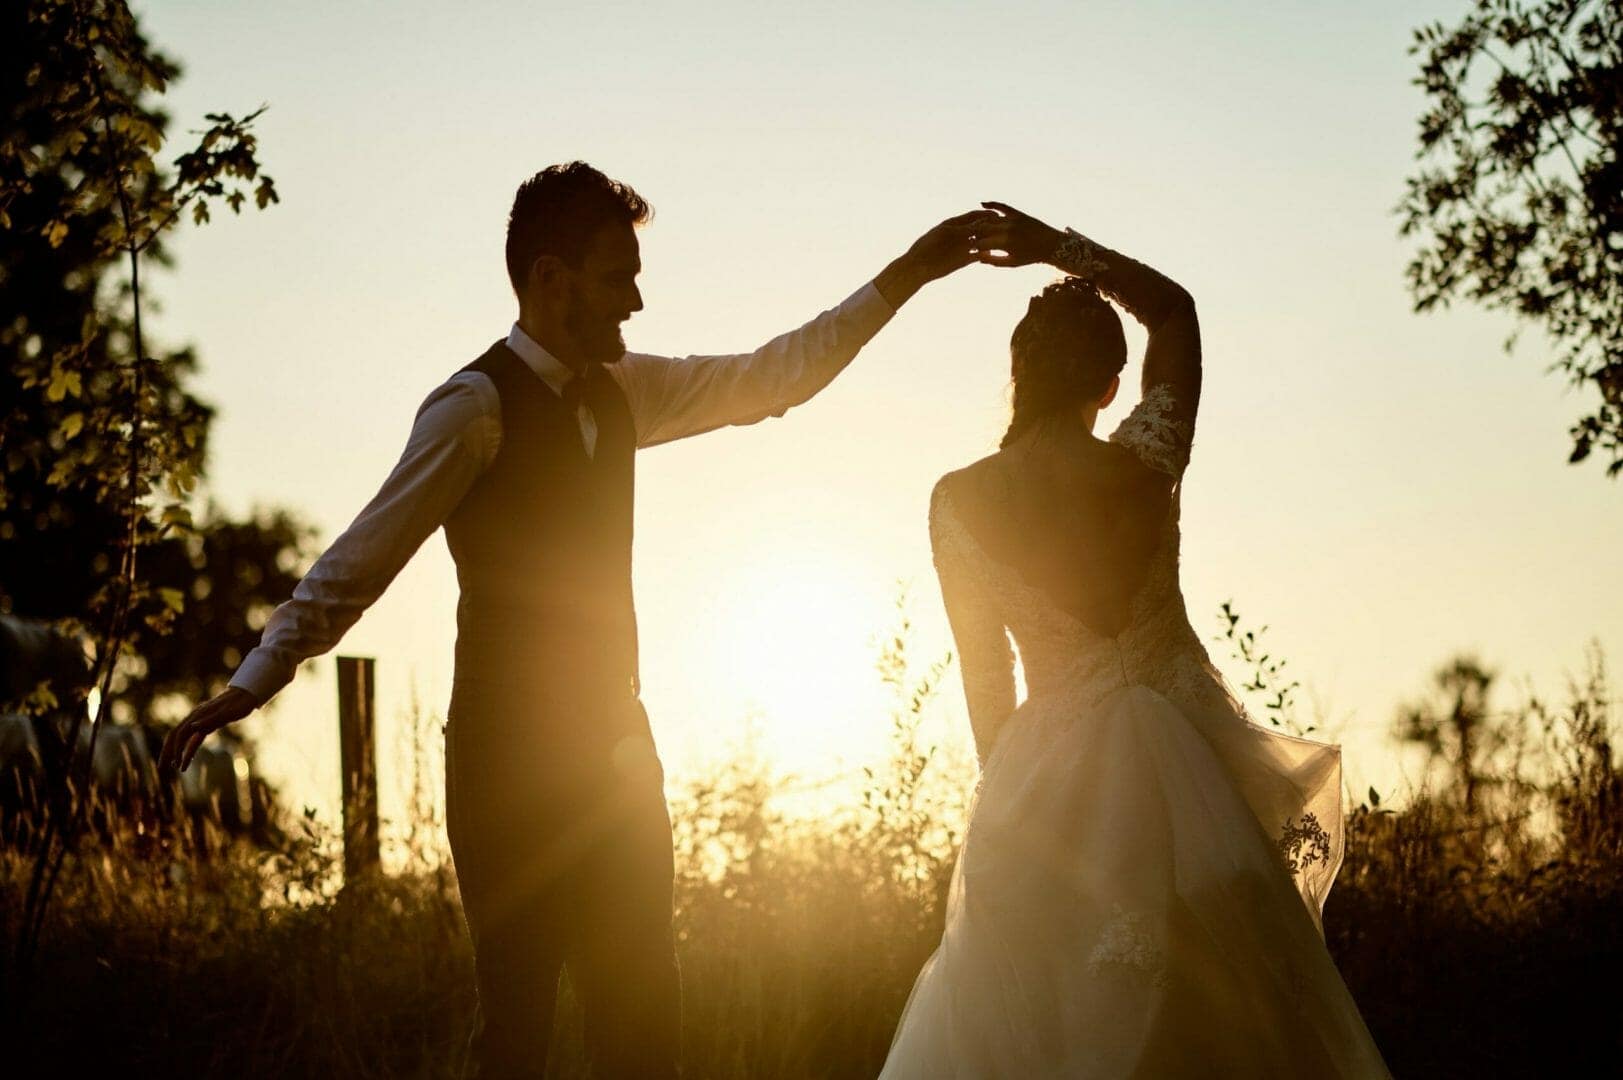 Golden hour photography at wedding